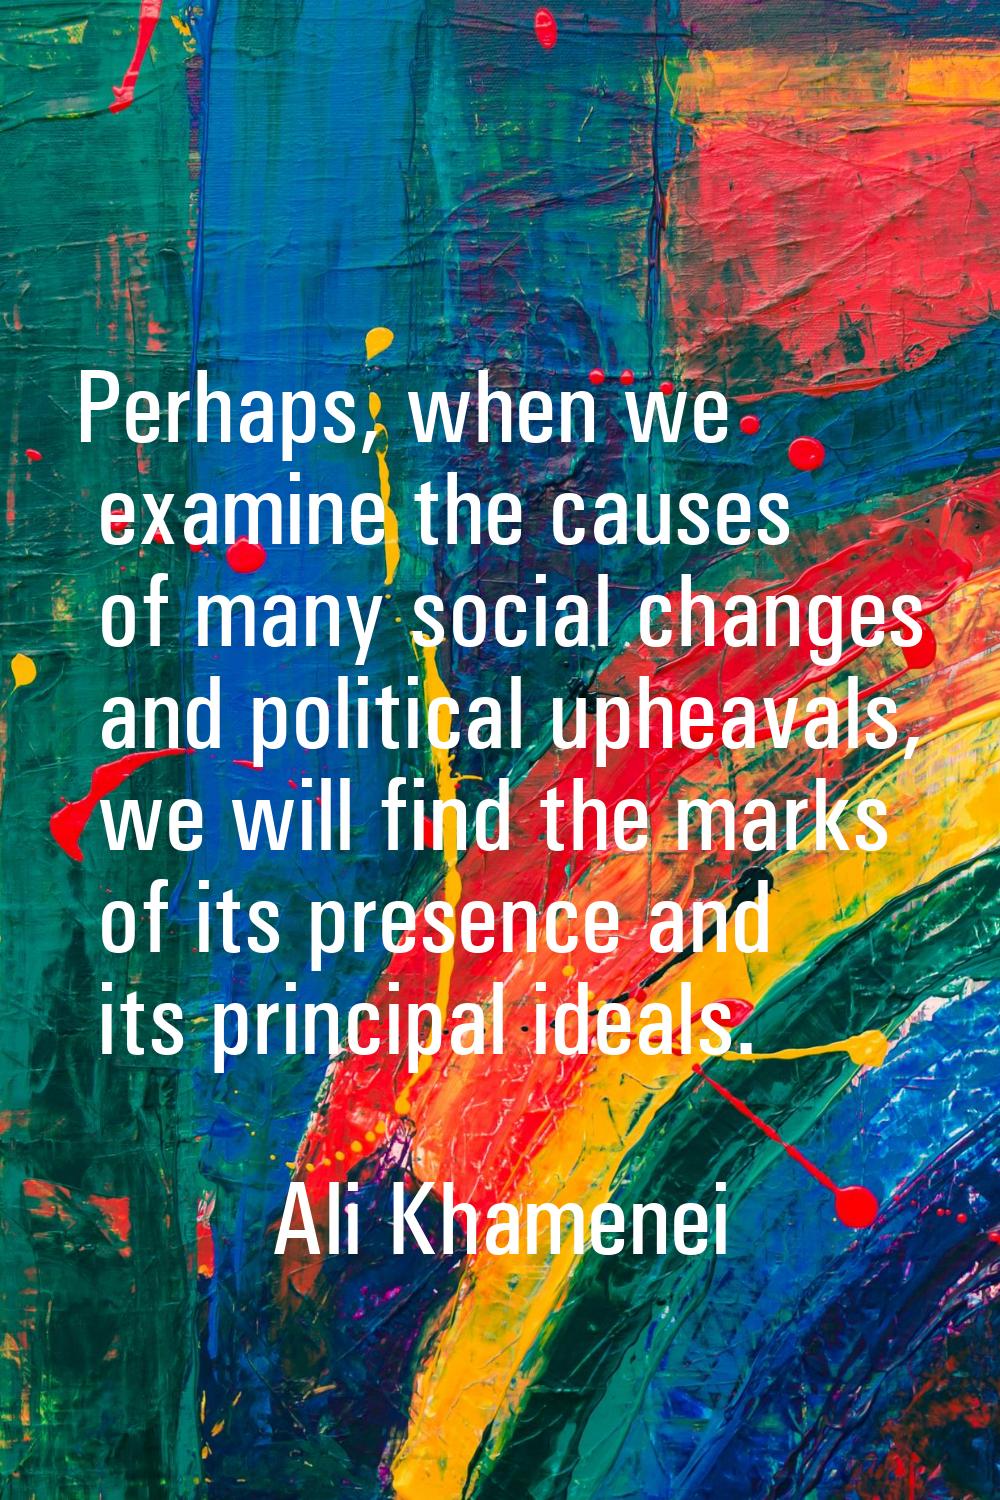 Perhaps, when we examine the causes of many social changes and political upheavals, we will find th